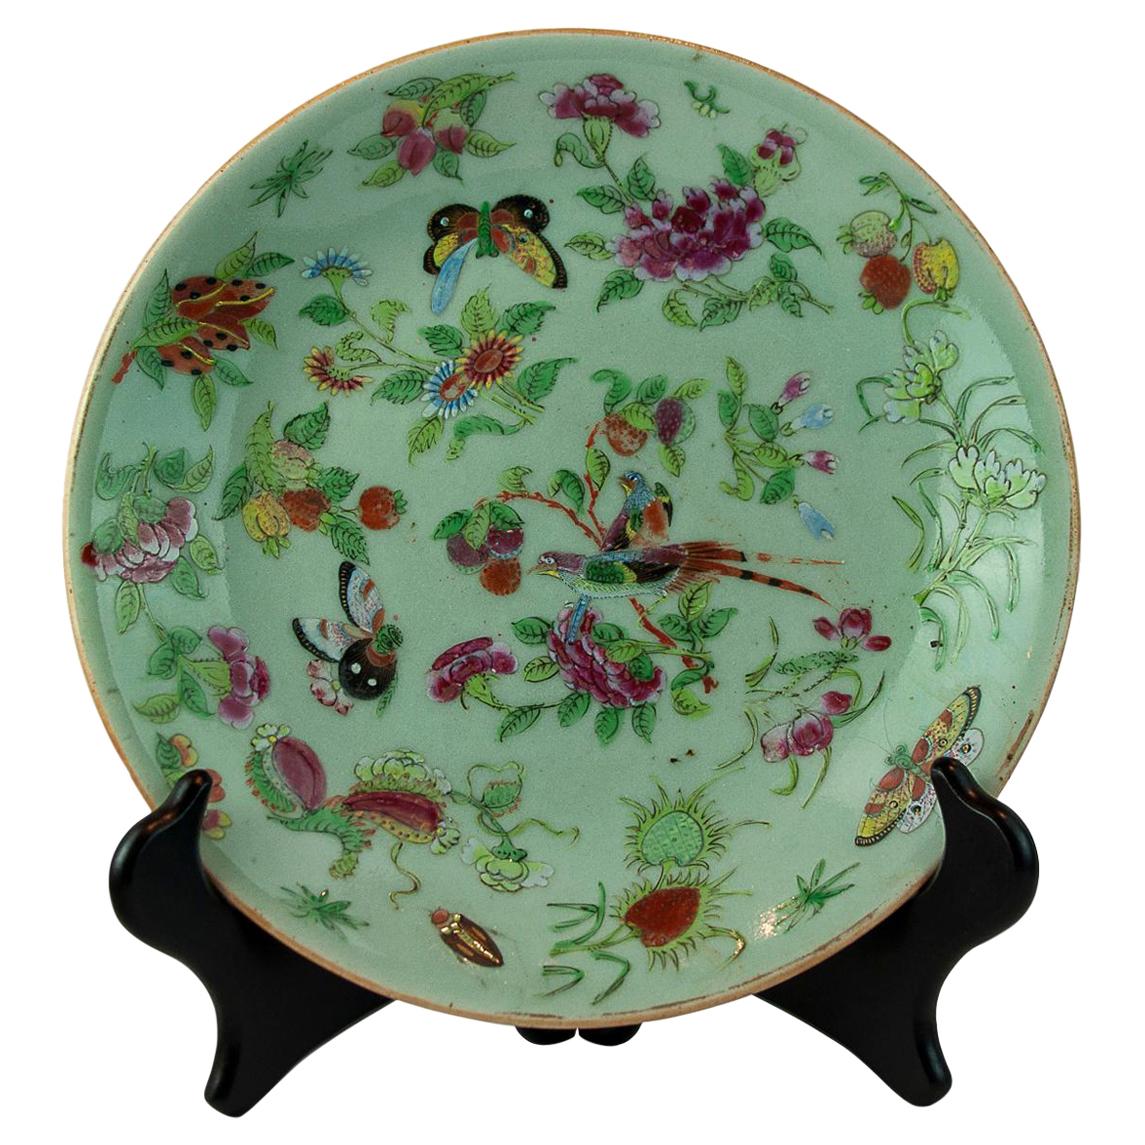 Chinese Celadon Famille Rose 10-inch Plate, Canton, Qing Dynasty, ca. 1850